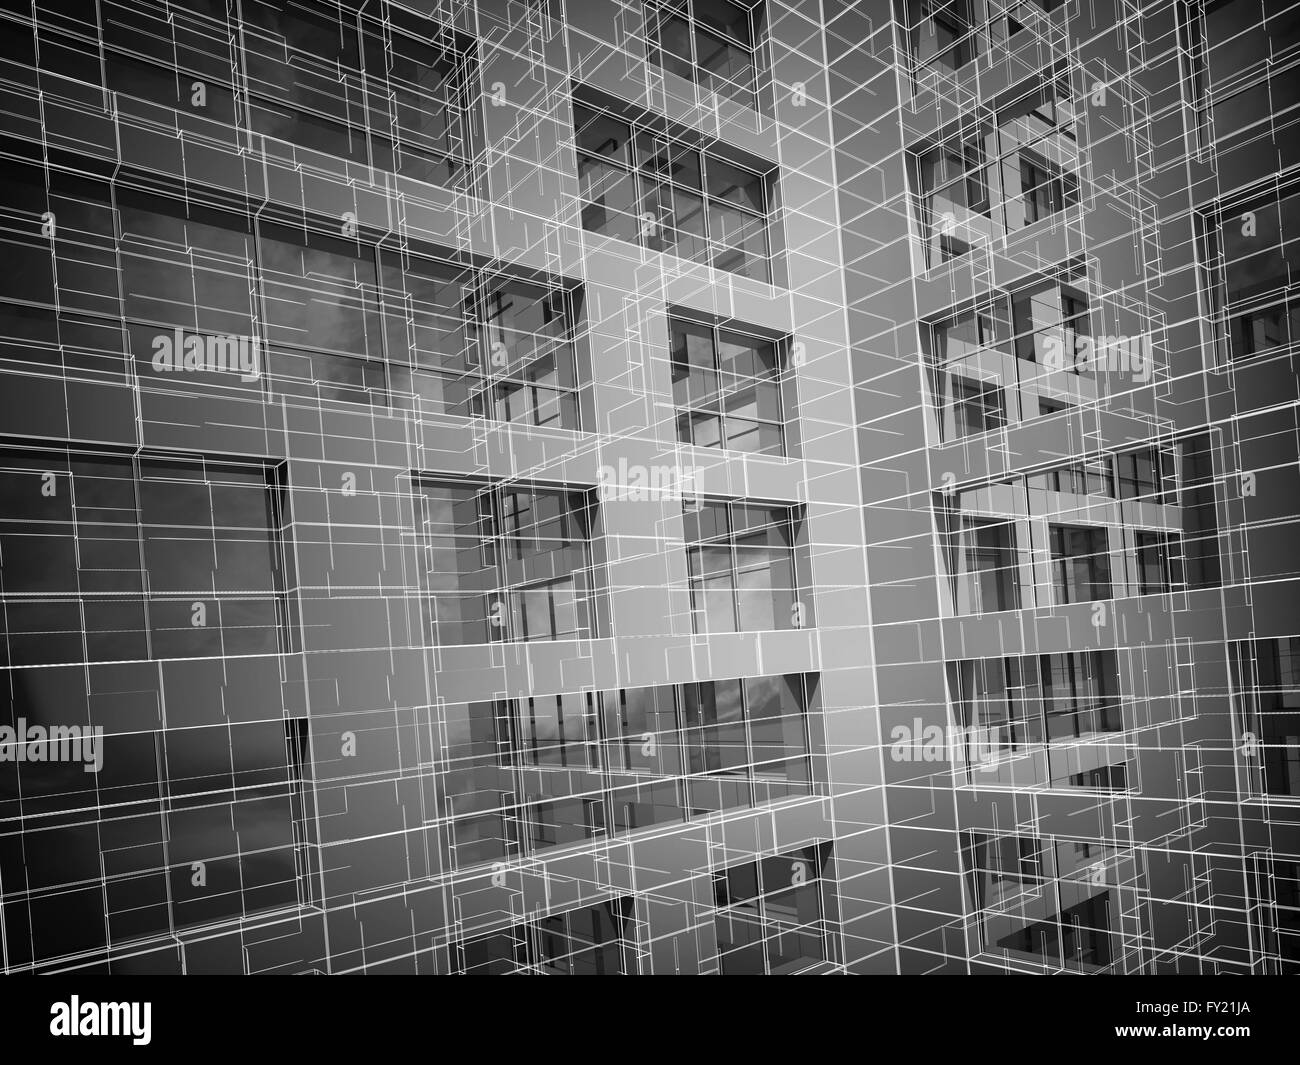 Abstract modern architecture background with wire-frame lines, 3d render illustration Stock Photo